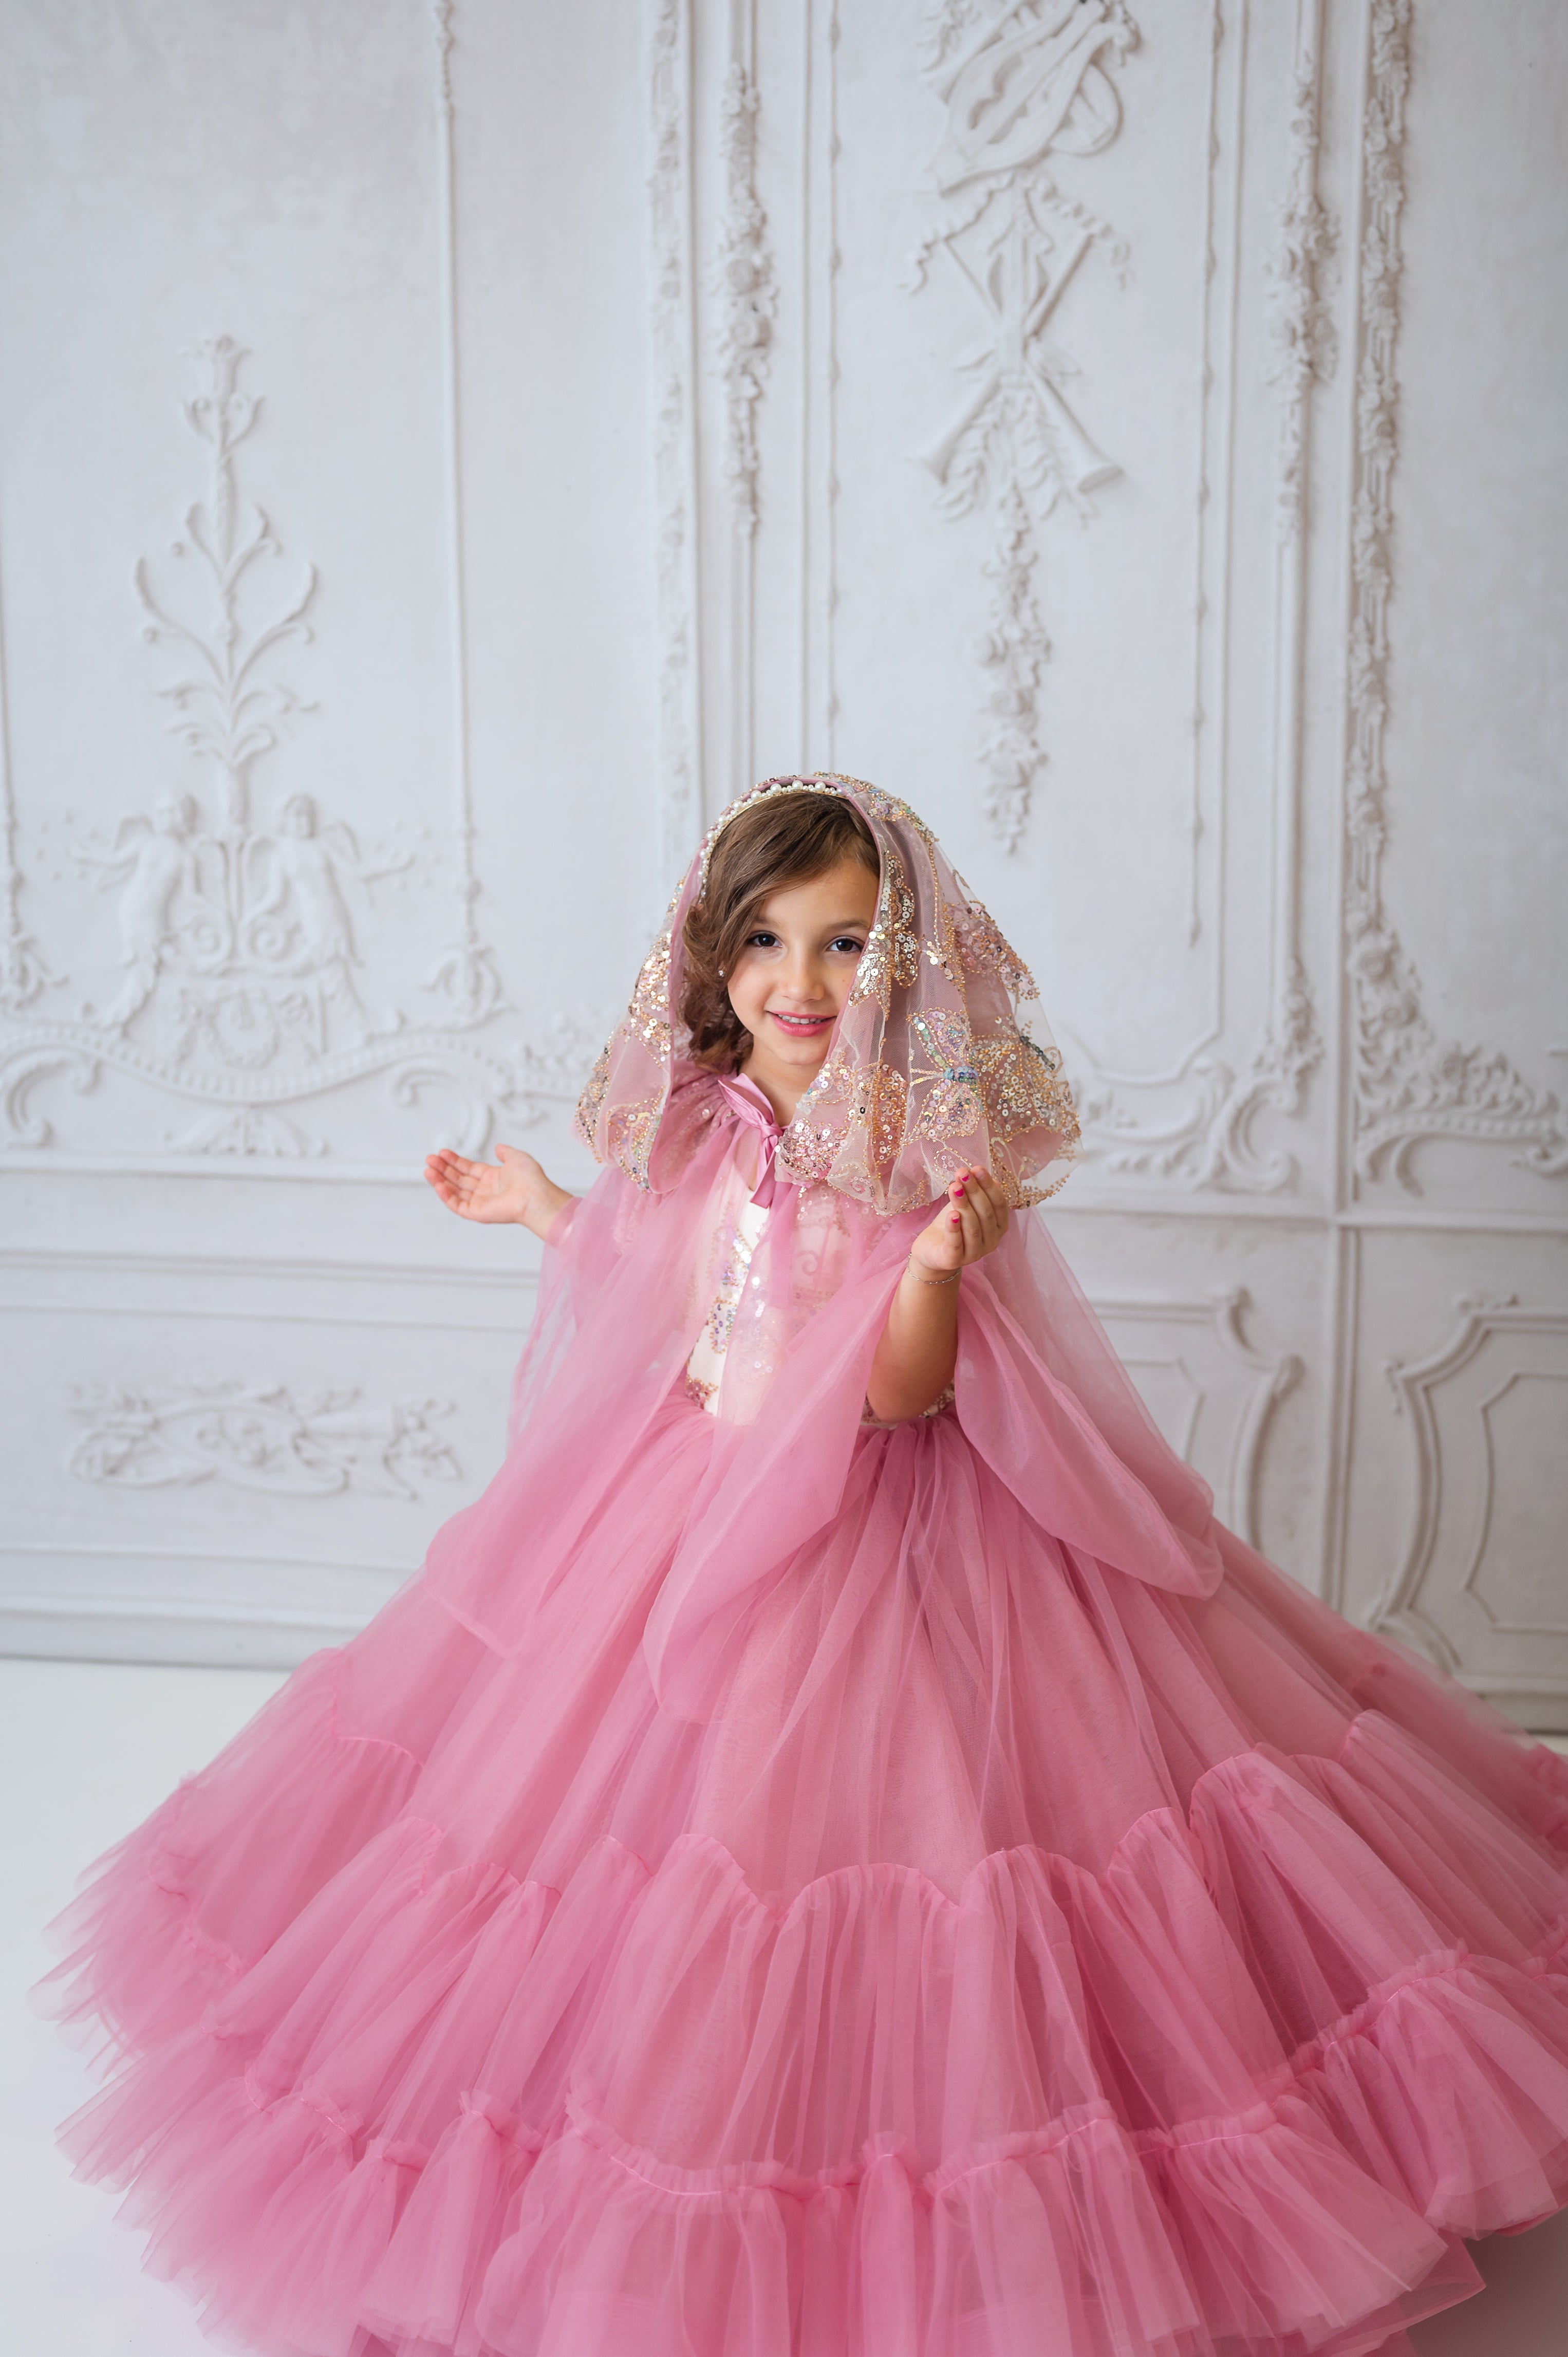 COUTURE RENTAL GOWNS FOR GIRLS - FOR PHOTOGRAPHY SESSIONS